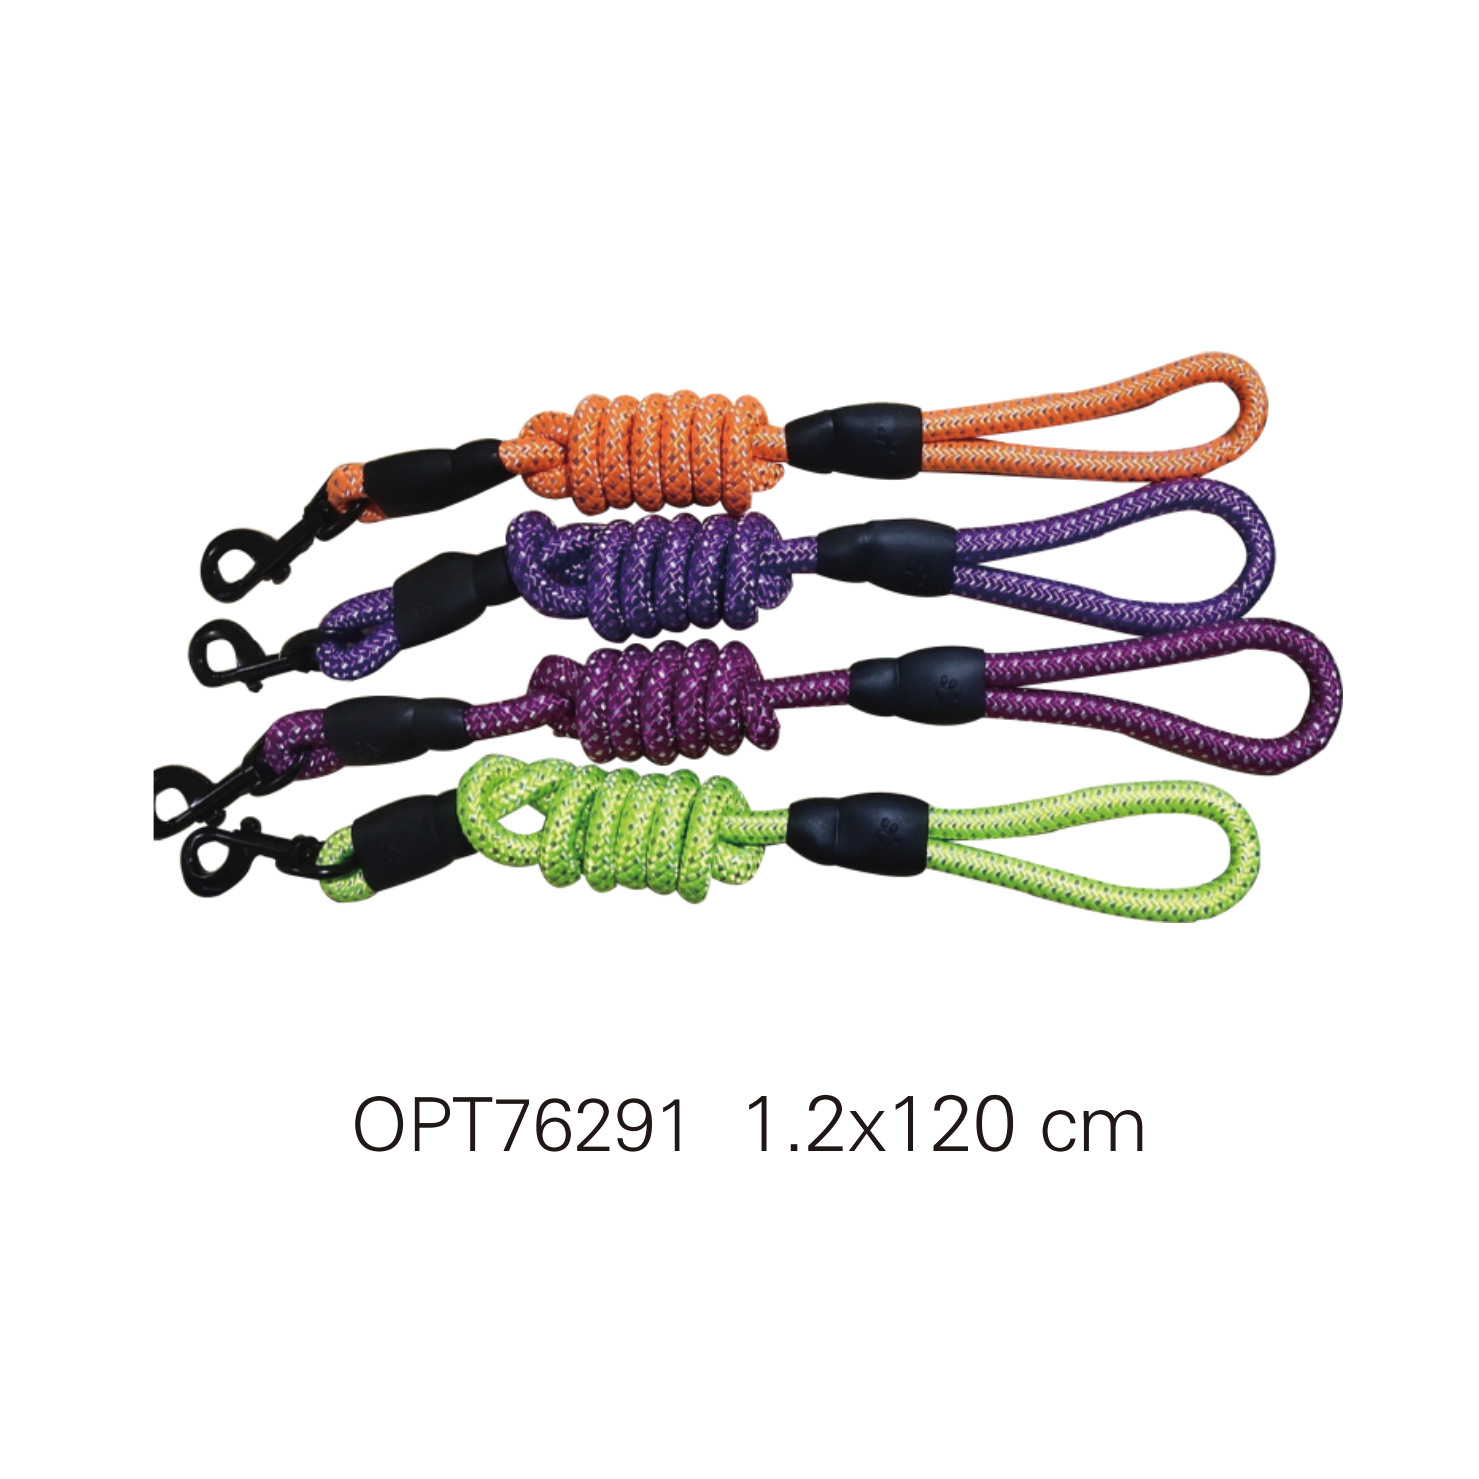 OPT76291 Pet leashes